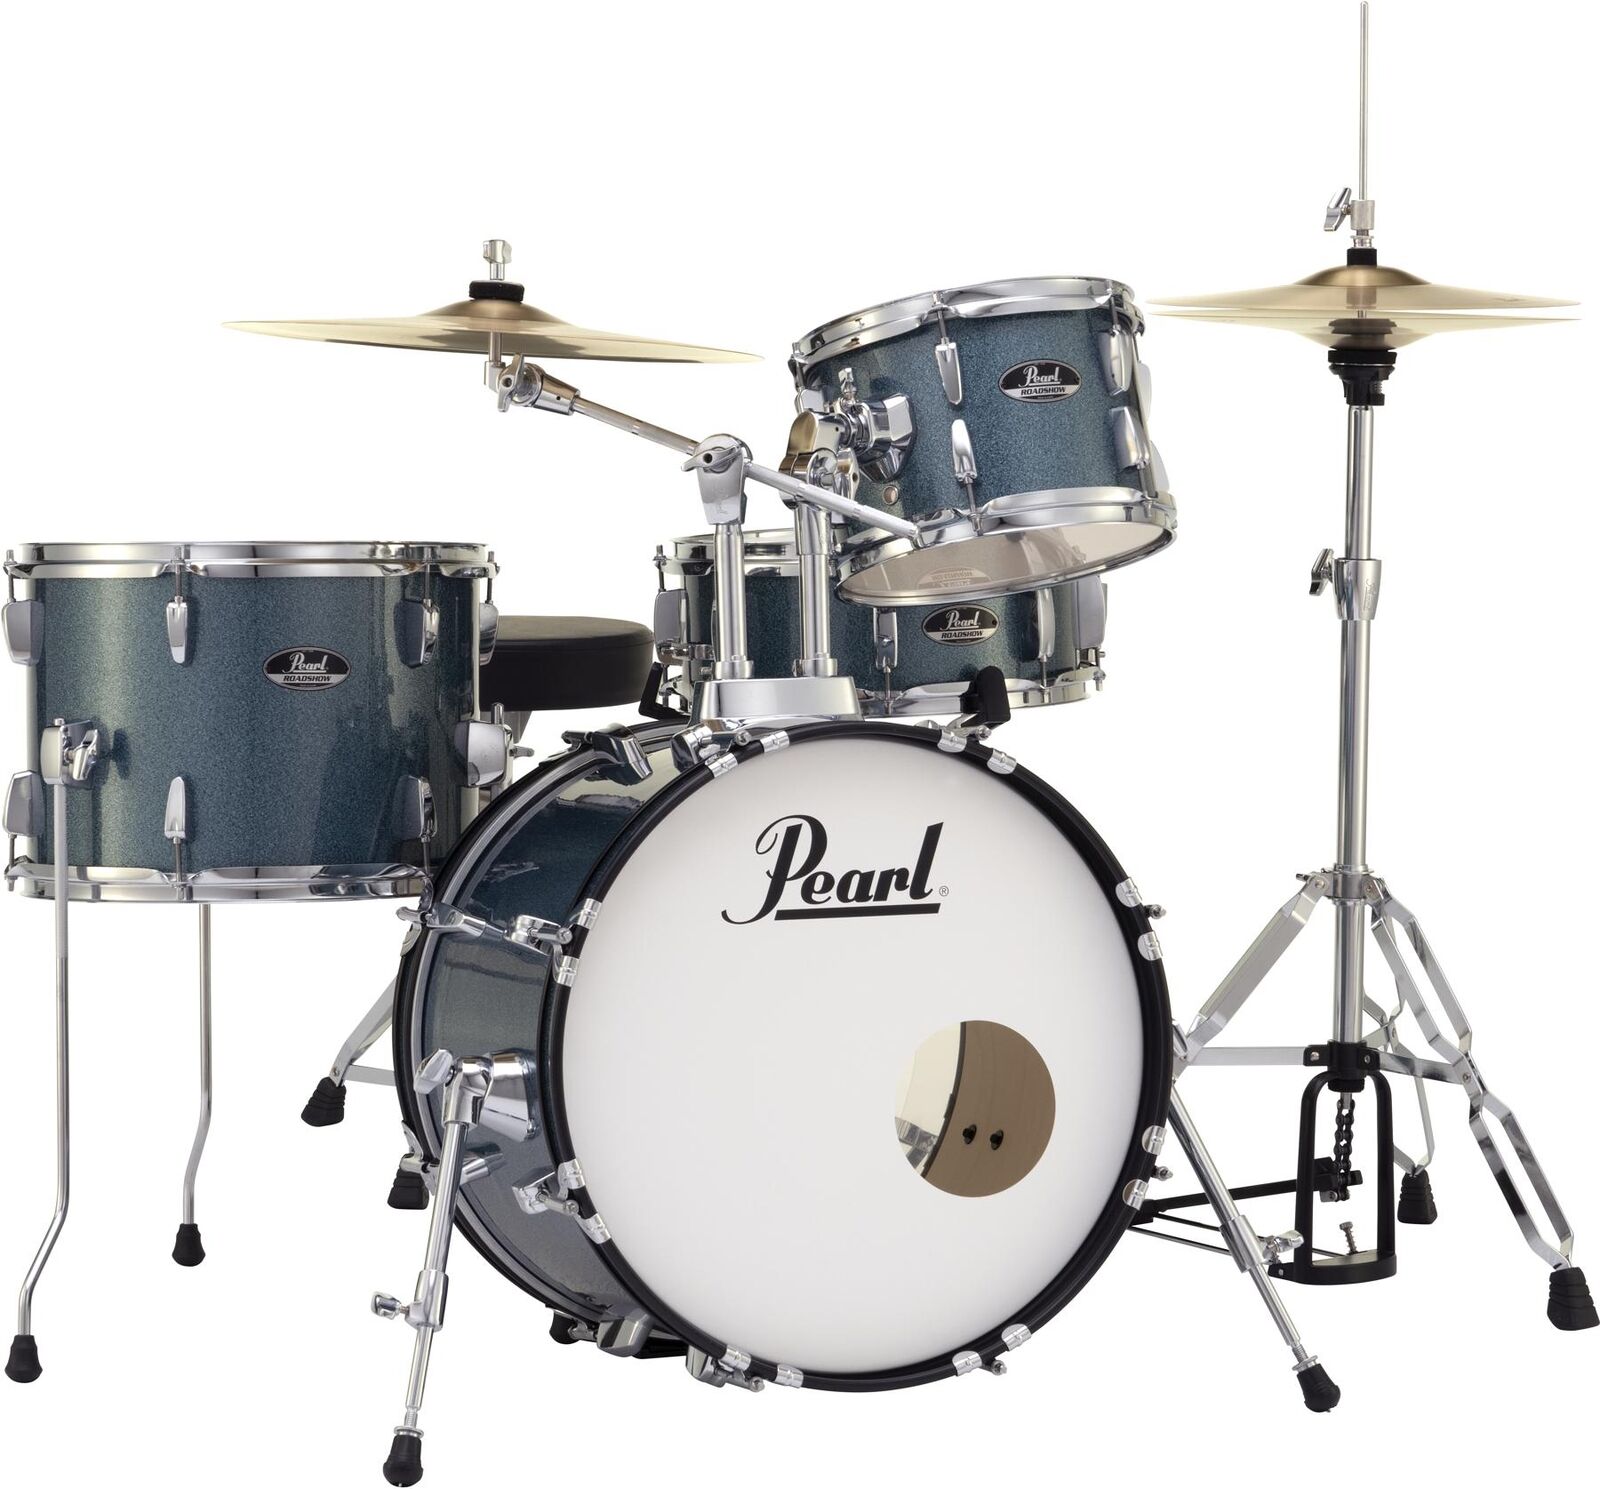 Pearl Roadshow 4-piece Complete Drum Set with Cymbals – Aqua Blue Glitter 1